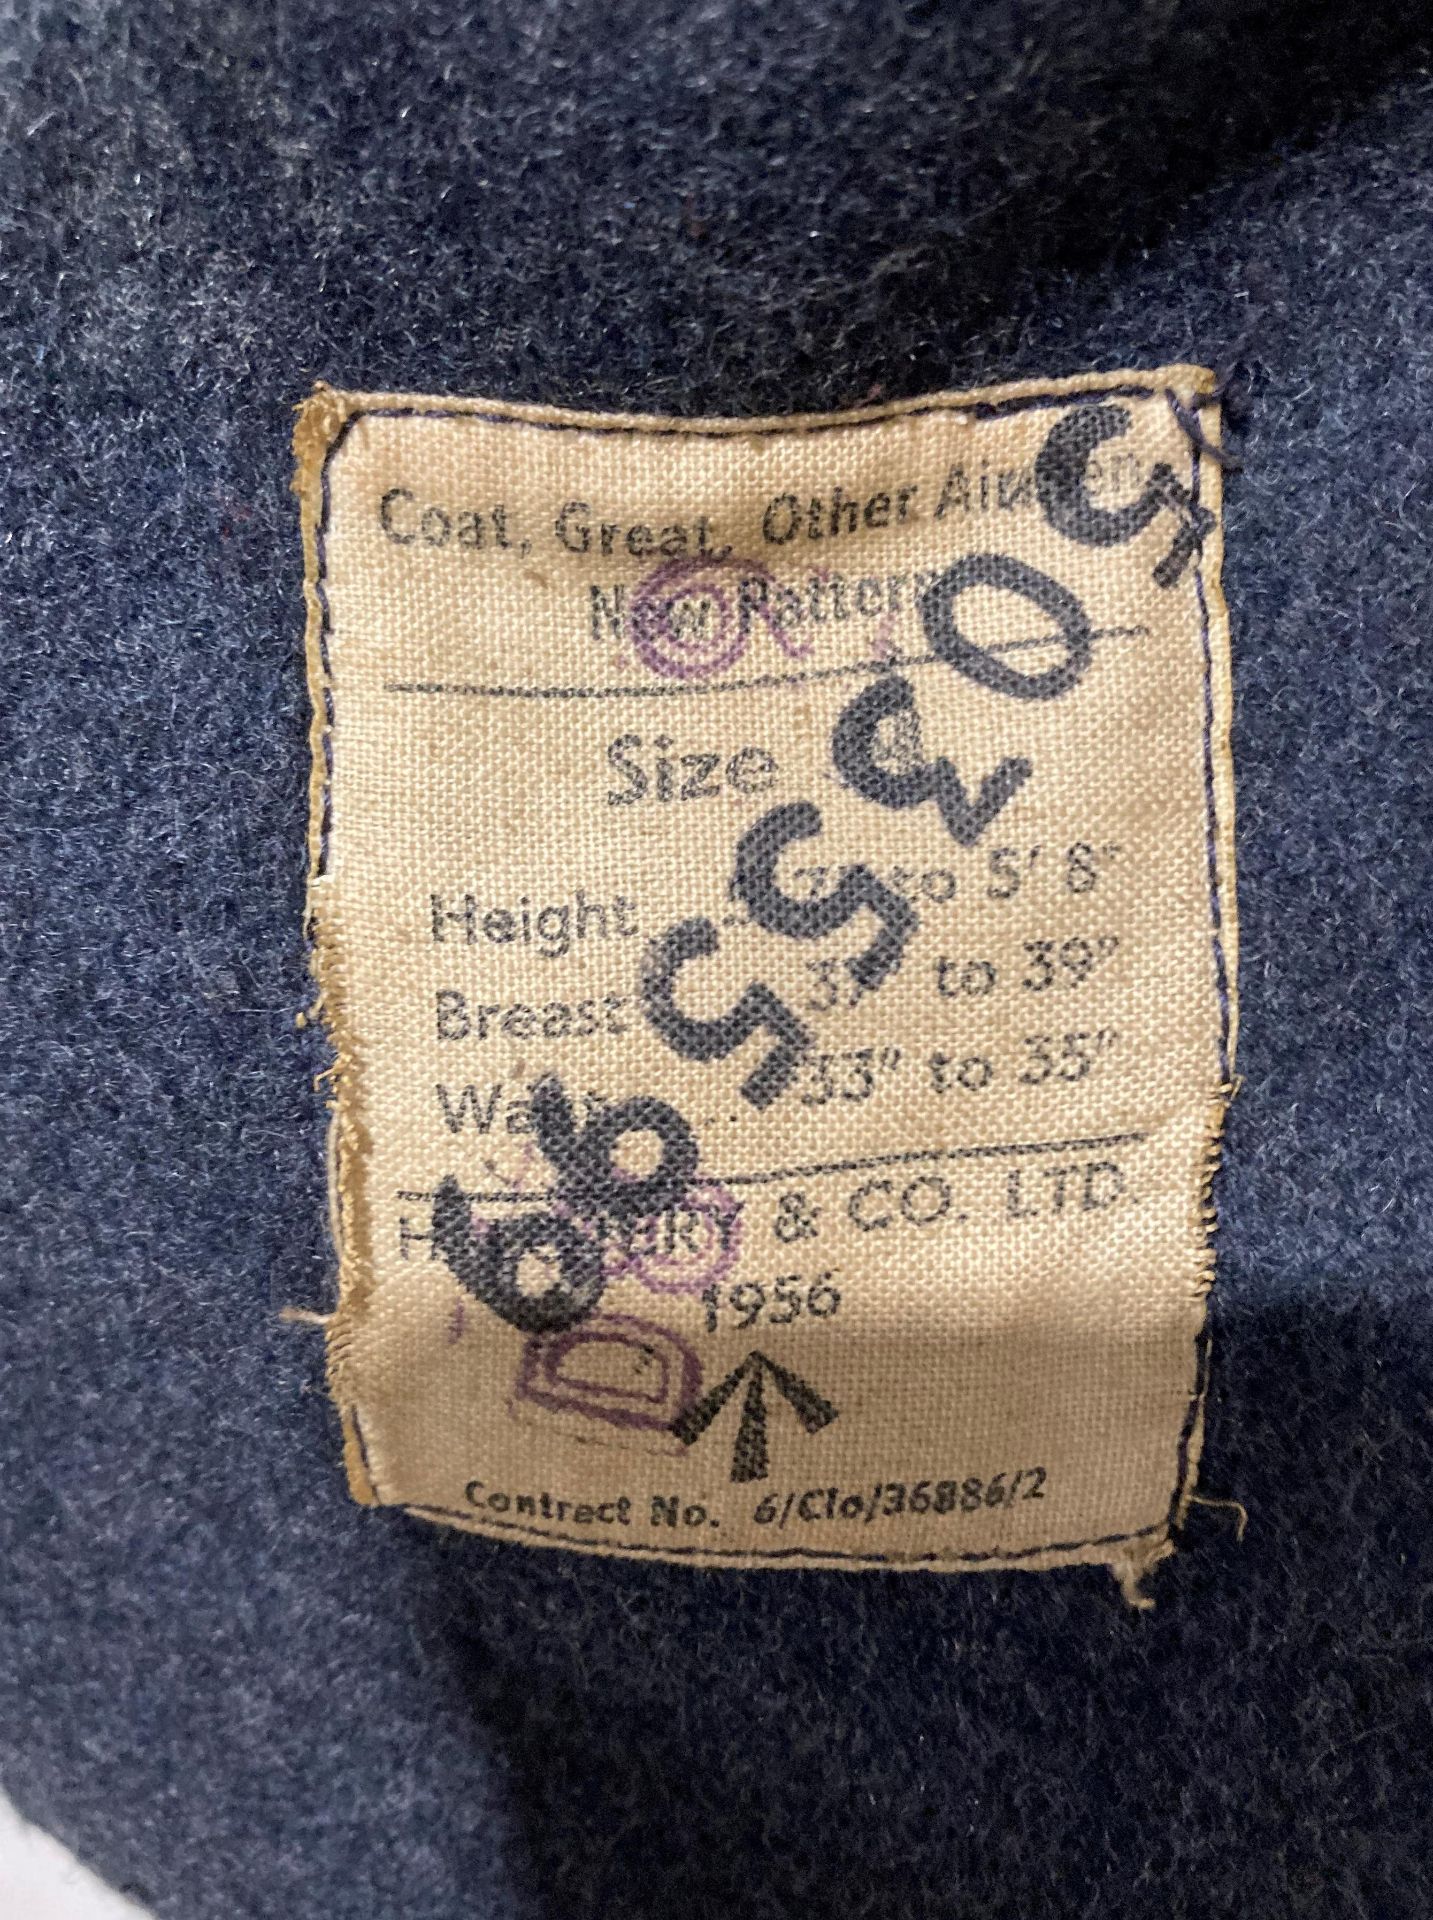 Genuine RAF Airmen overcoat with brass RAF buttons, - Image 4 of 4